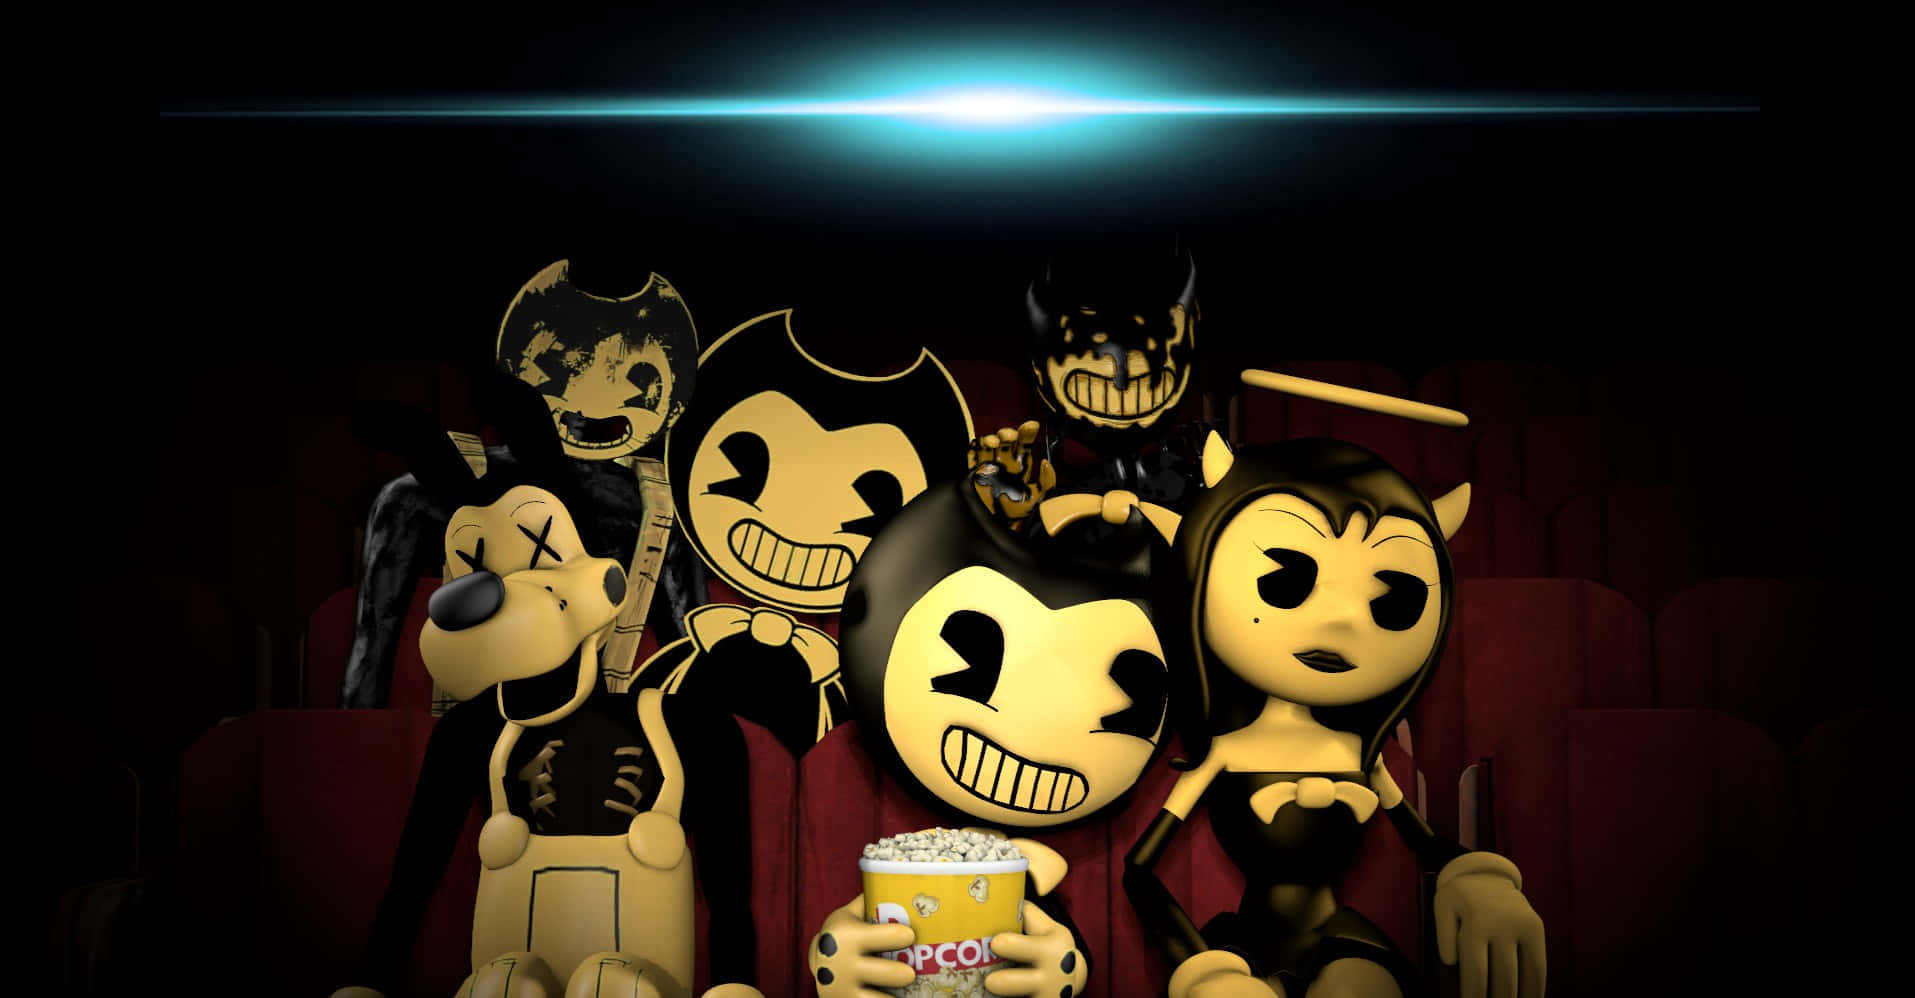 PC / Computer - Bendy and the Ink Machine - Alpha Bendy - The